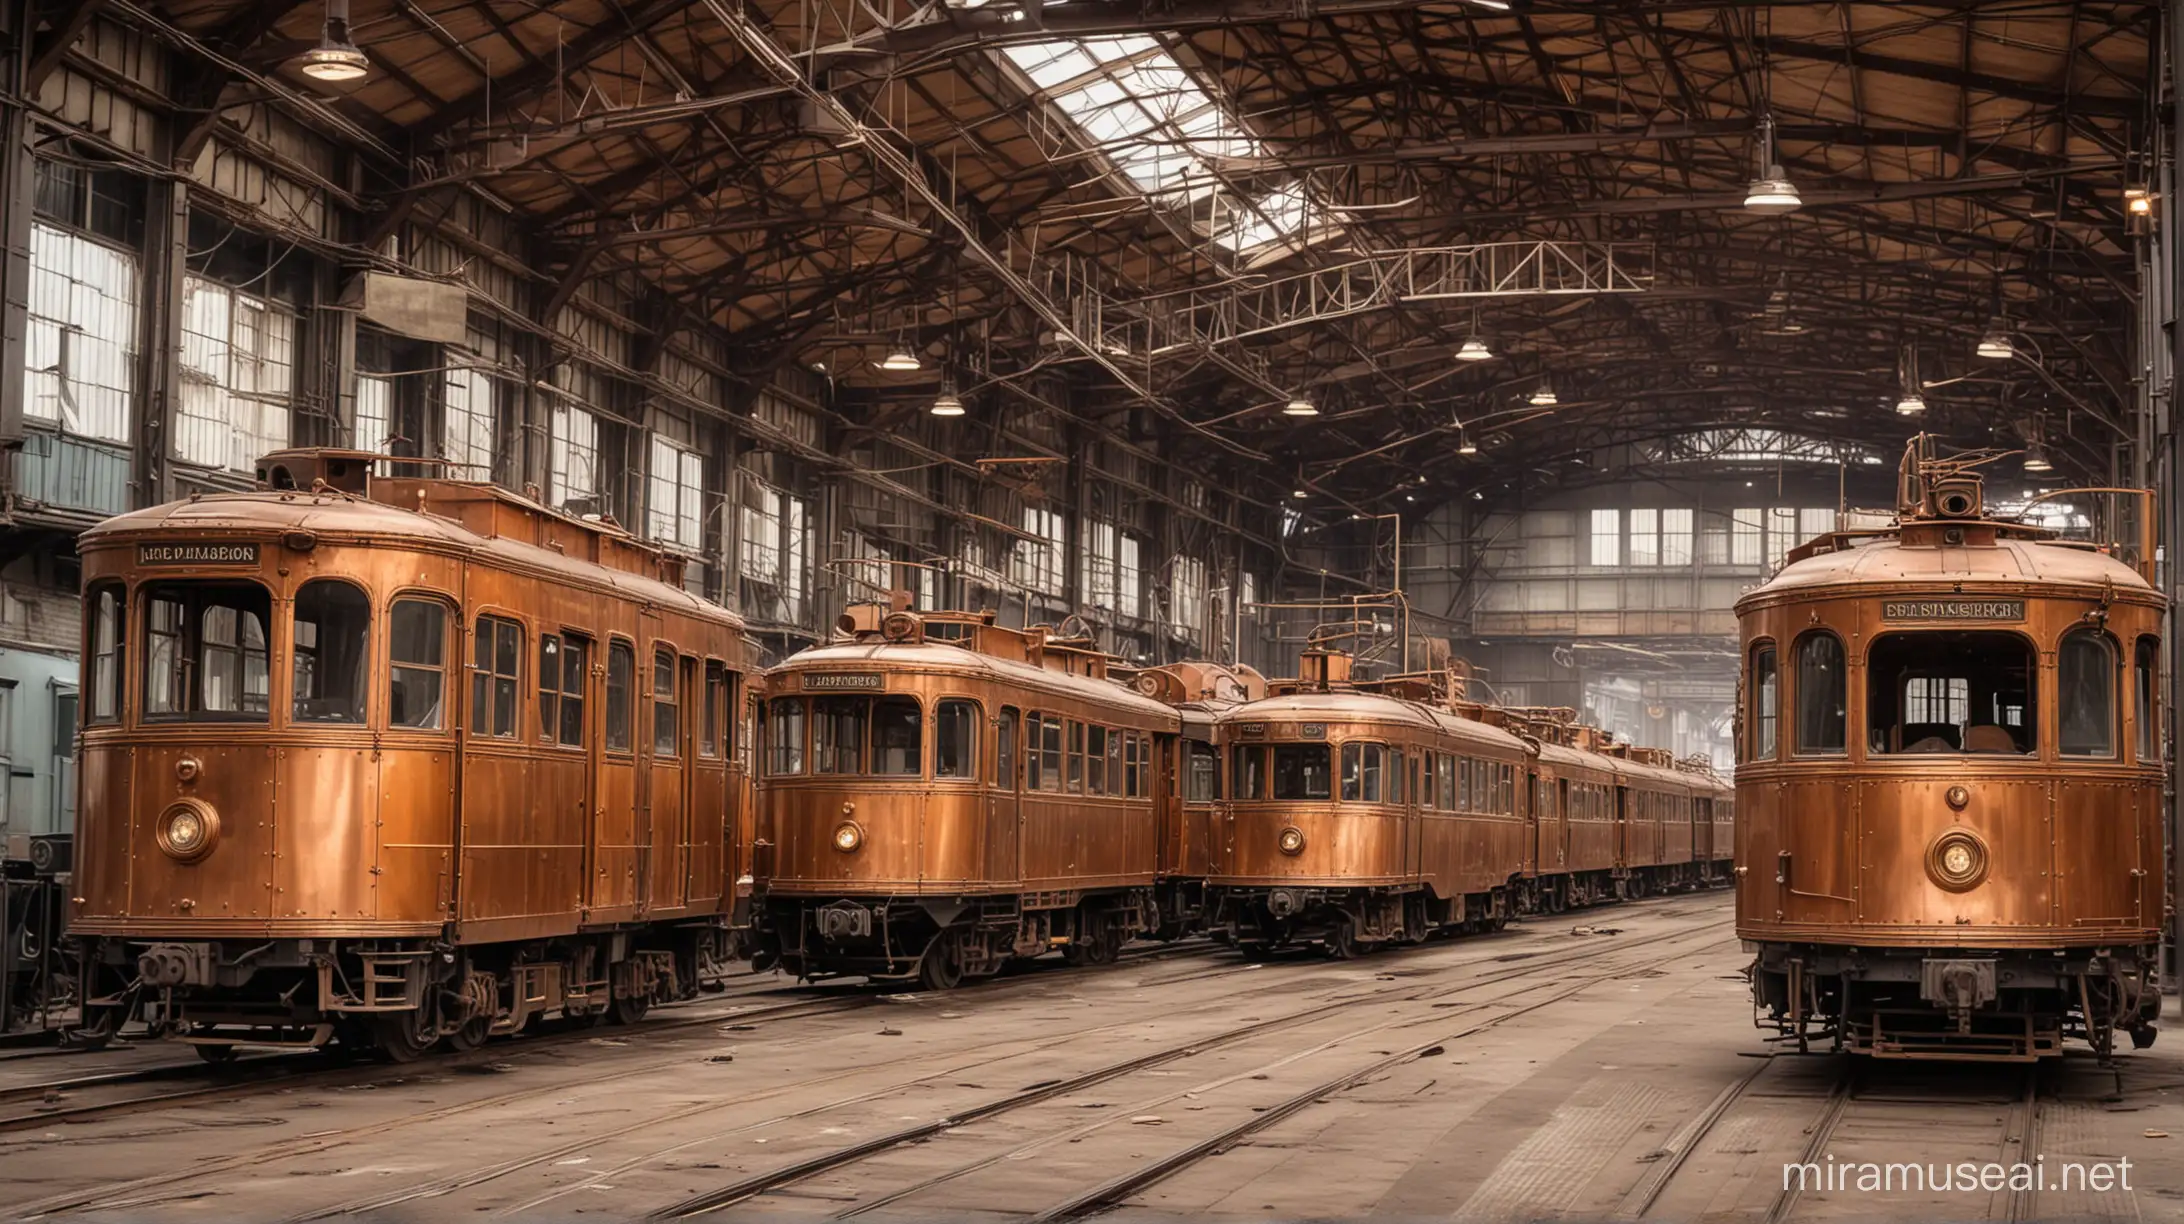 old steampunk tramcar depot. all tramcars are made of copper and brass.